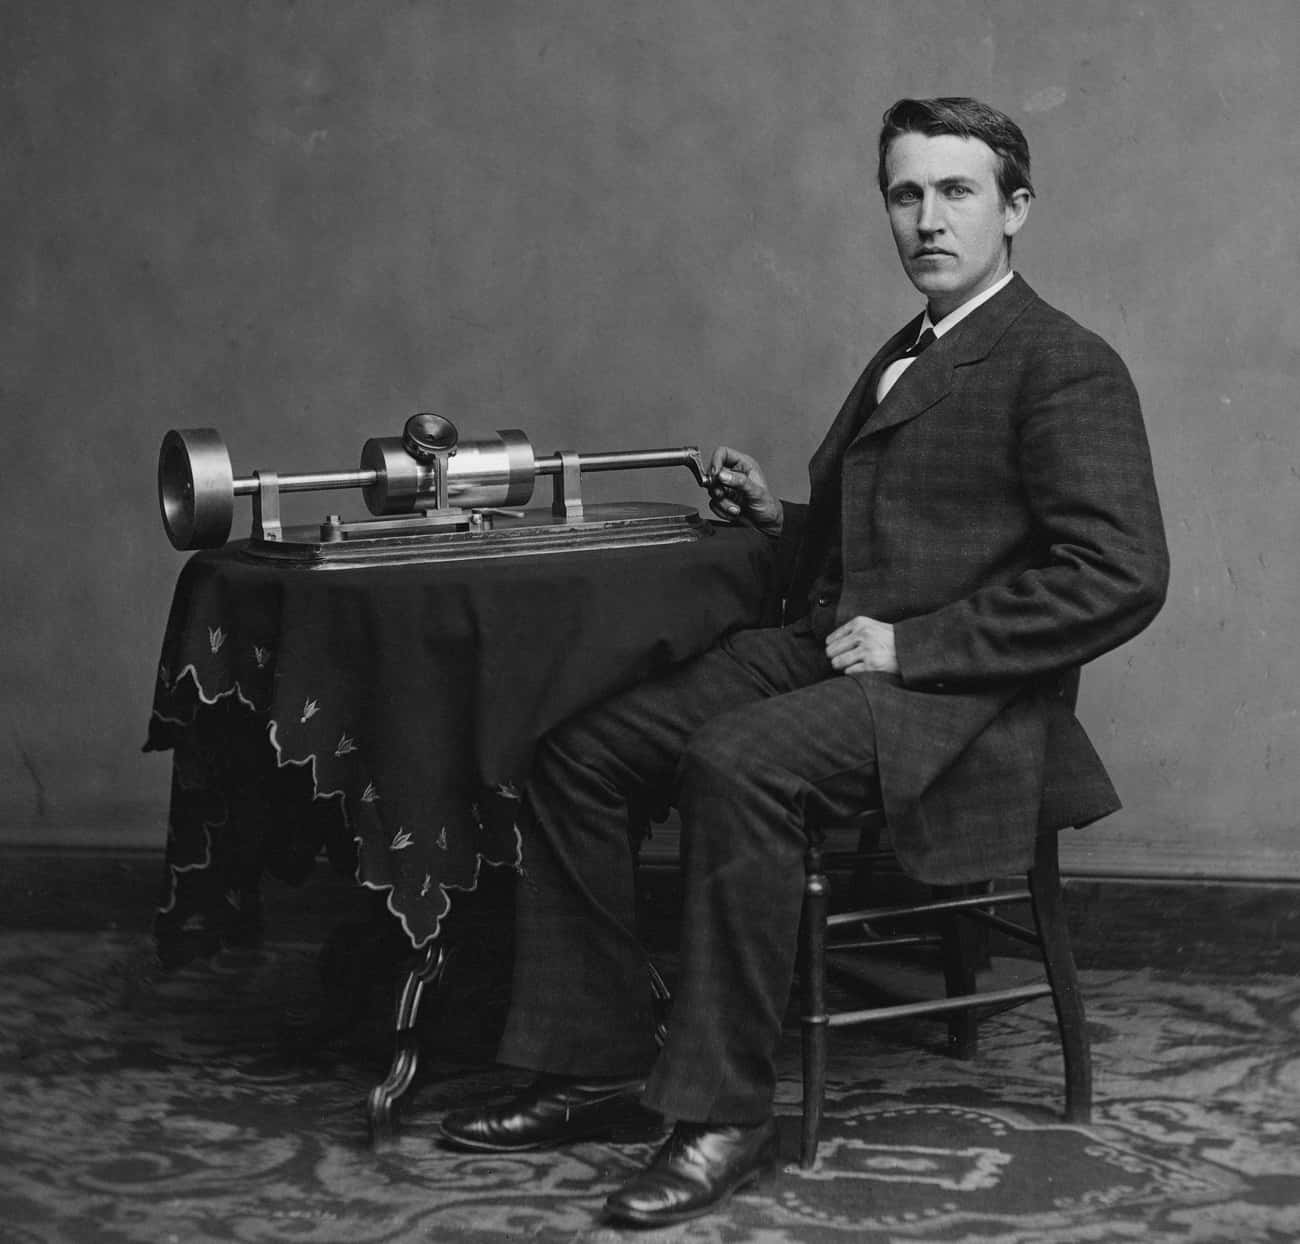 Thomas Edison Kicked Off Recorded Music Piracy With The Invention Of The Phonograph